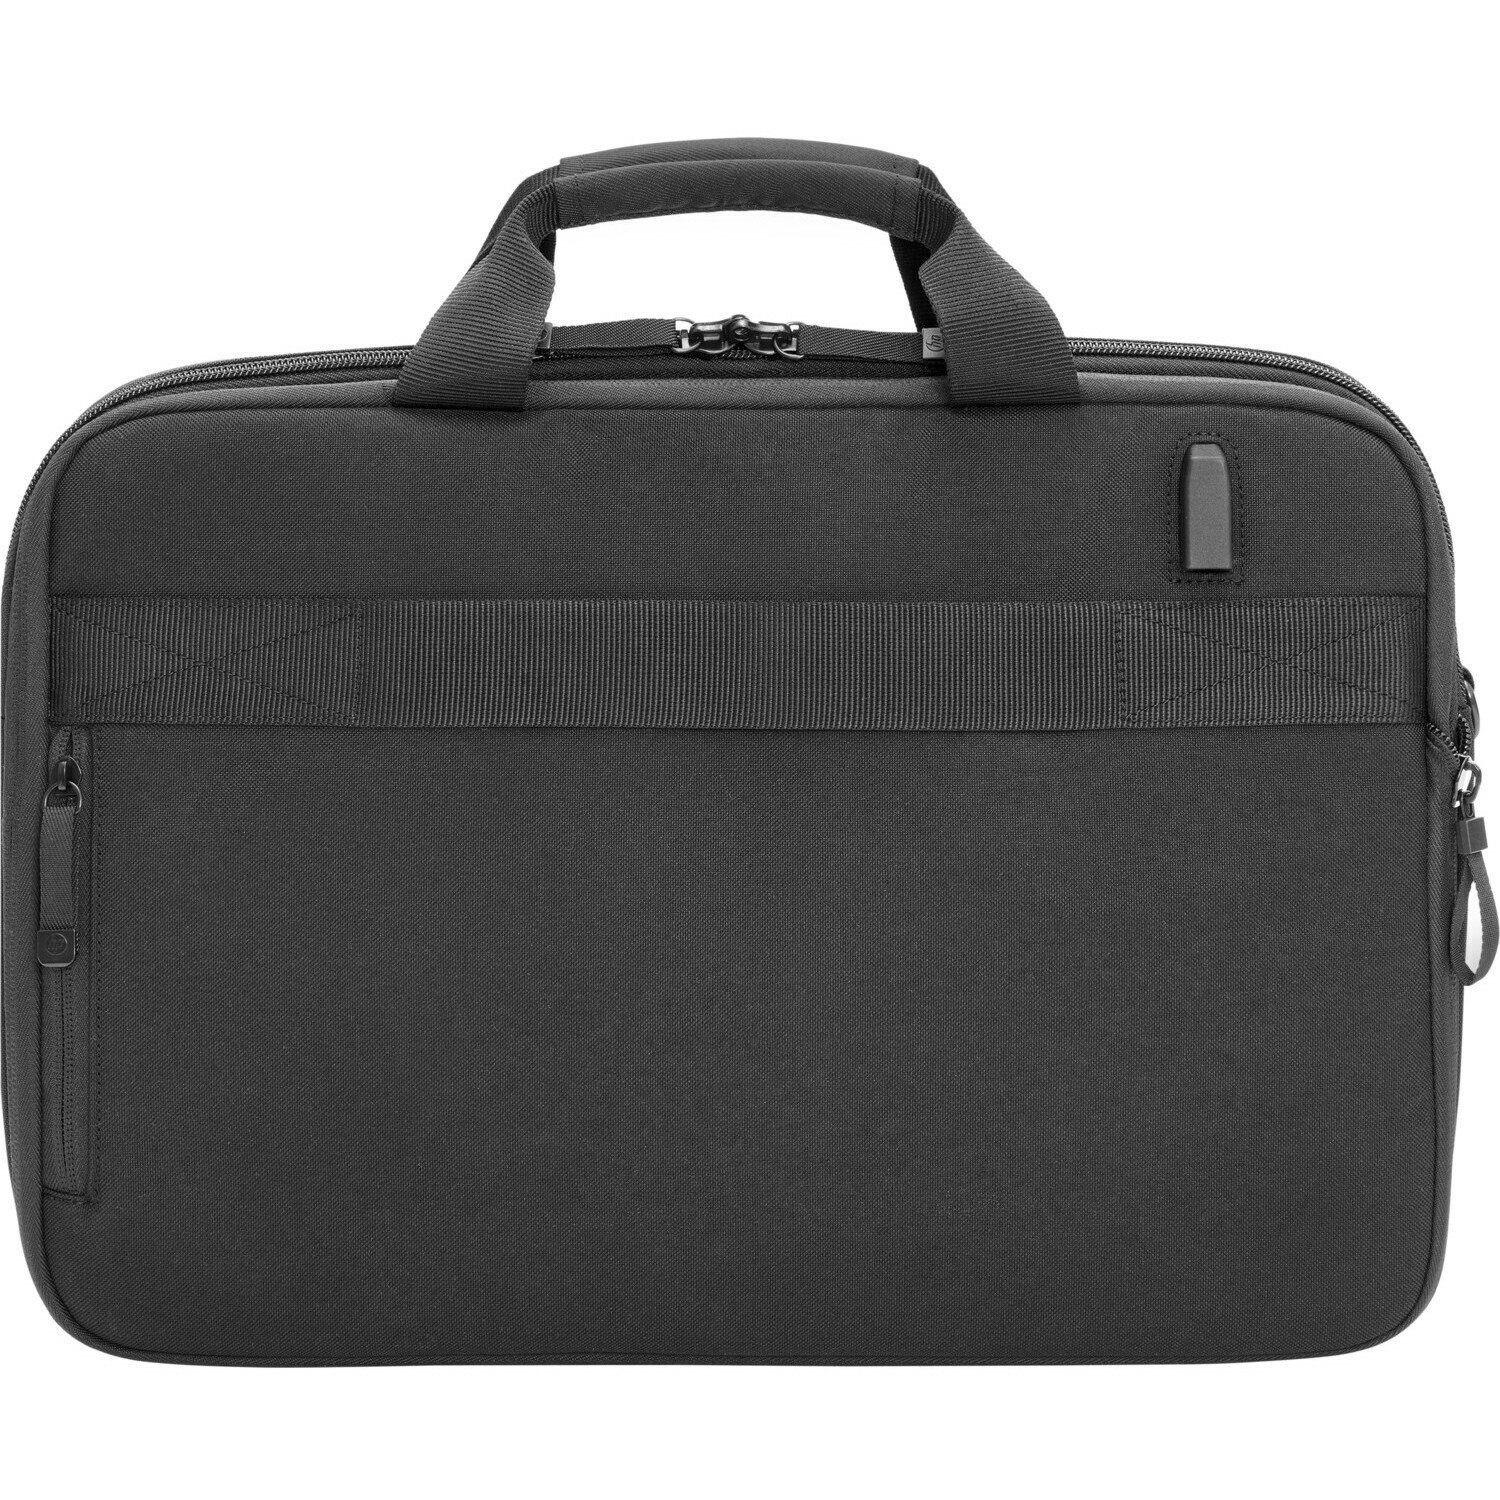 HP Renew Executive Carrying Case for 14" to 16.1" HP Notebook, Accessories - Black